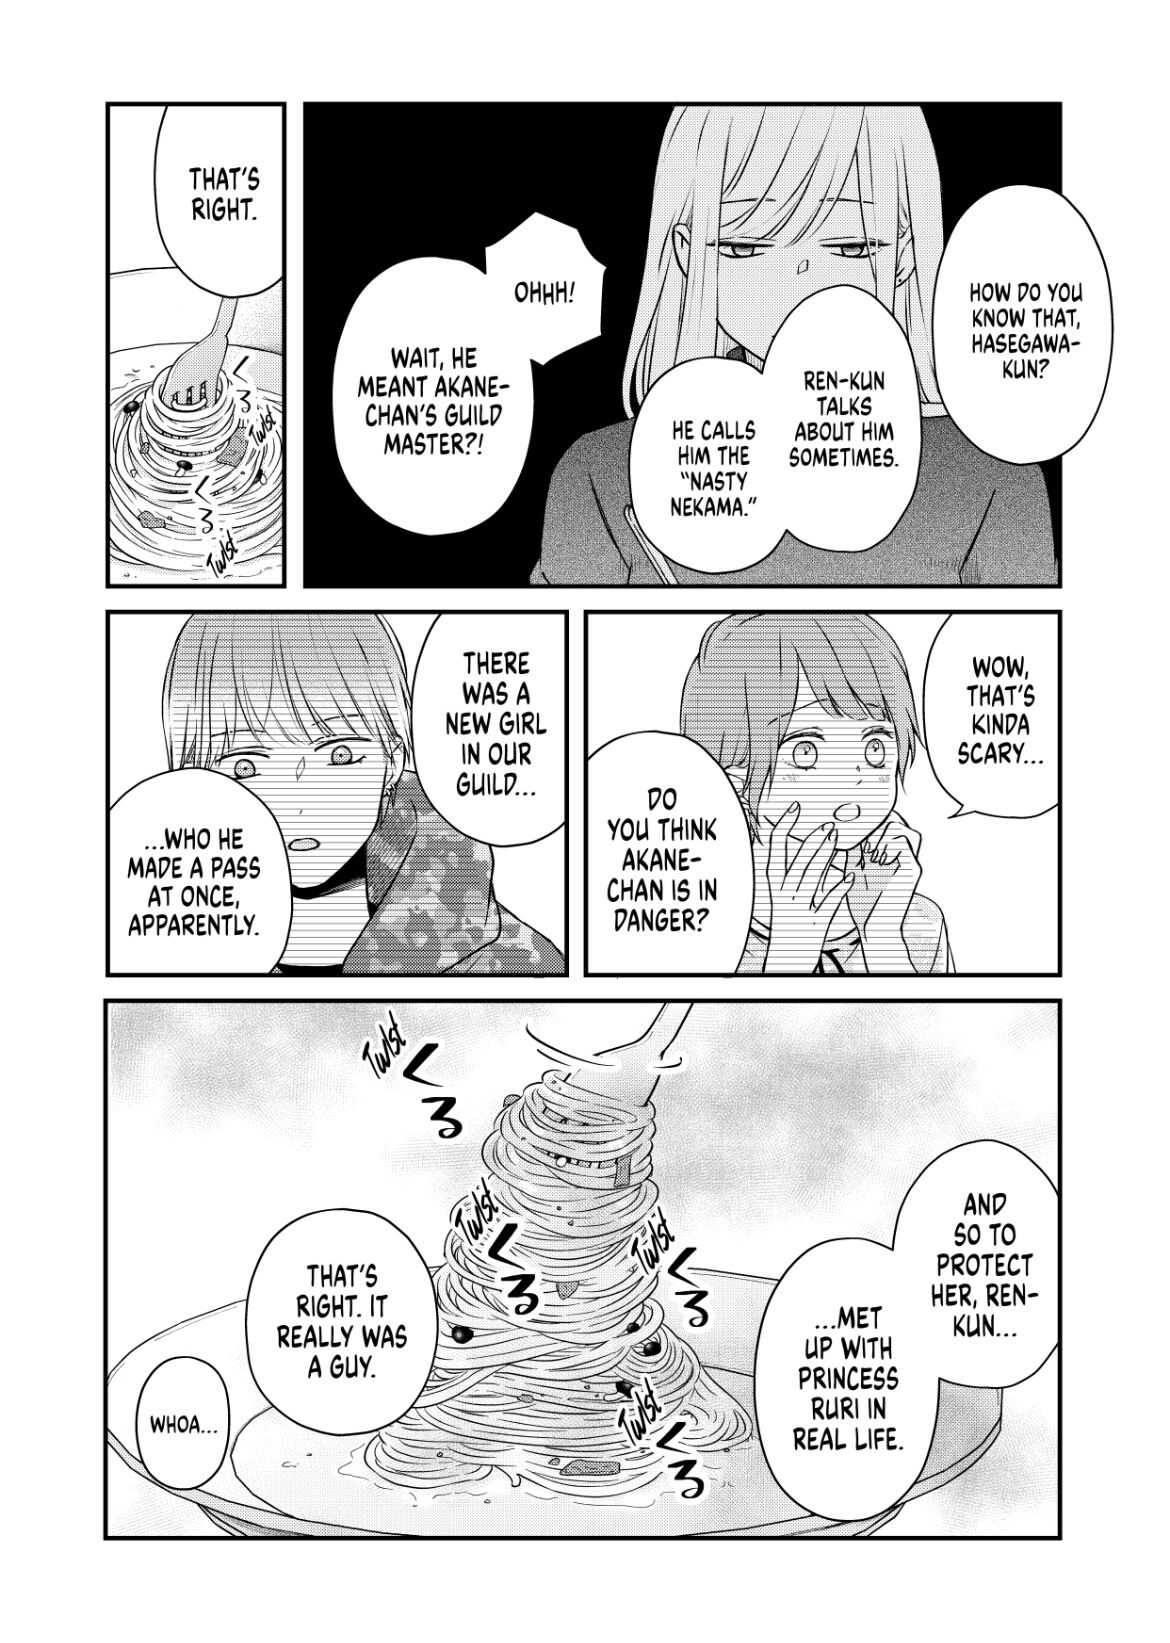 My Love Story with Yamada-Kun at Lv999 Chapter 100: Do we finally have a  love rival for Yamada?